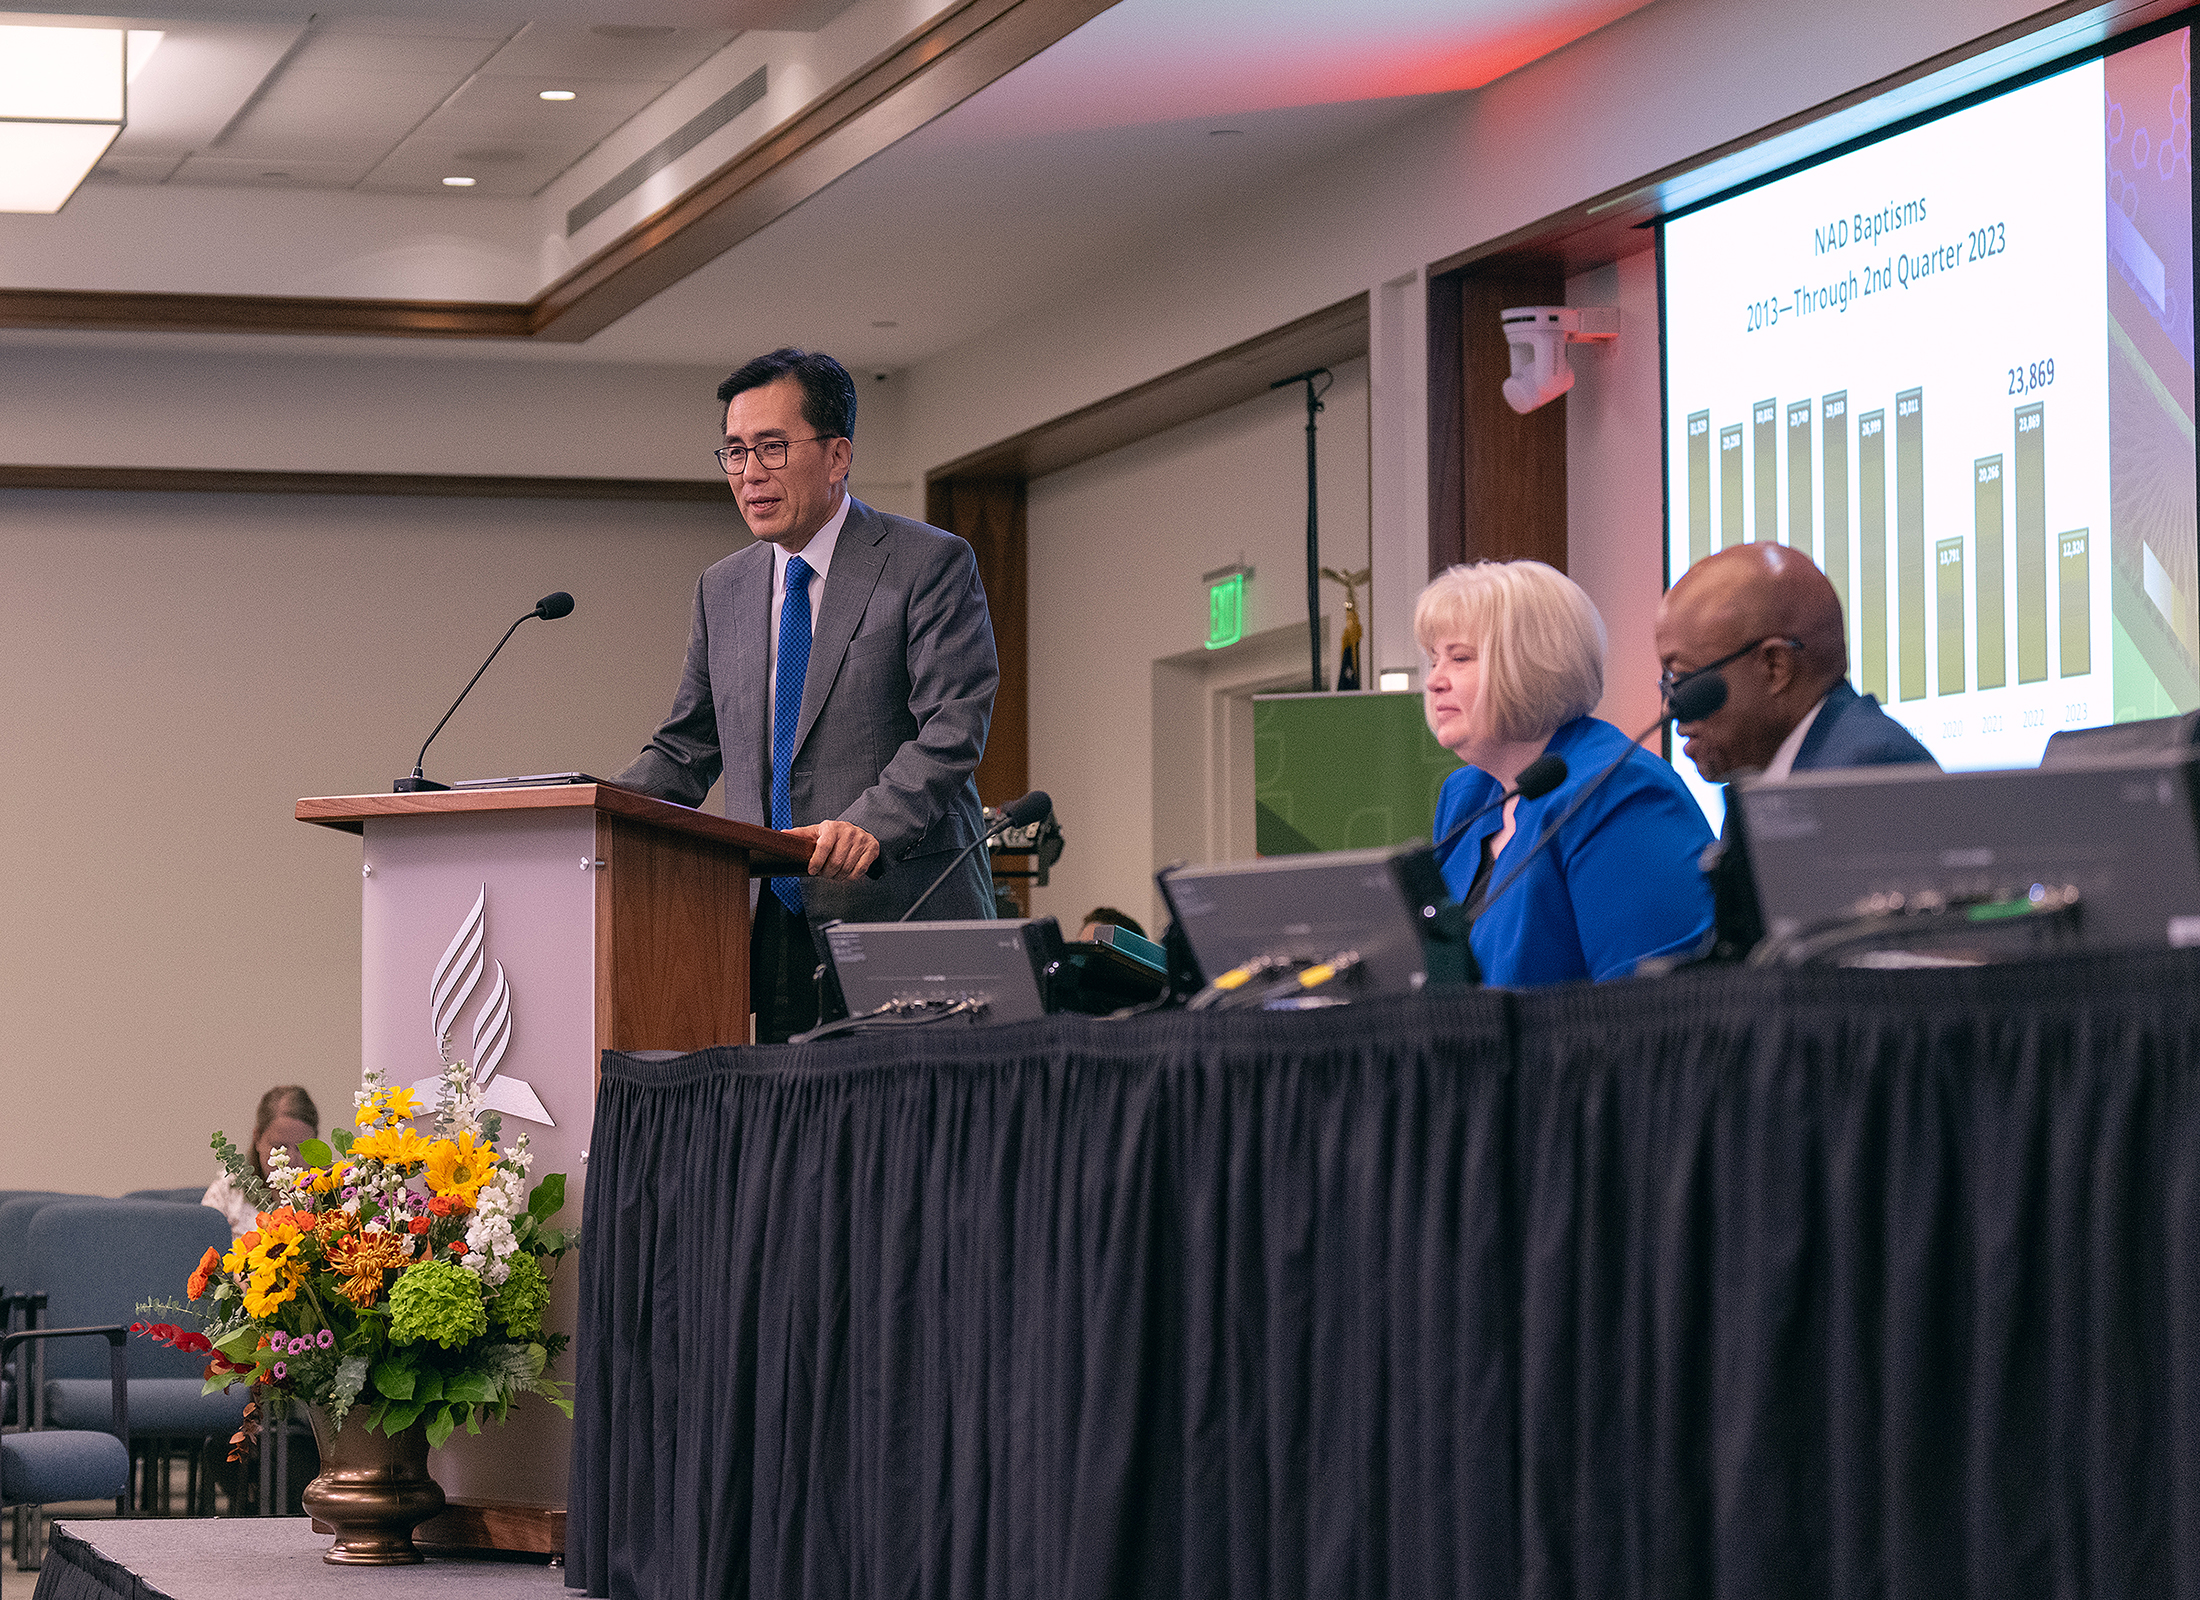 Asian man standing and speaking at a podium as white woman and black man look on.